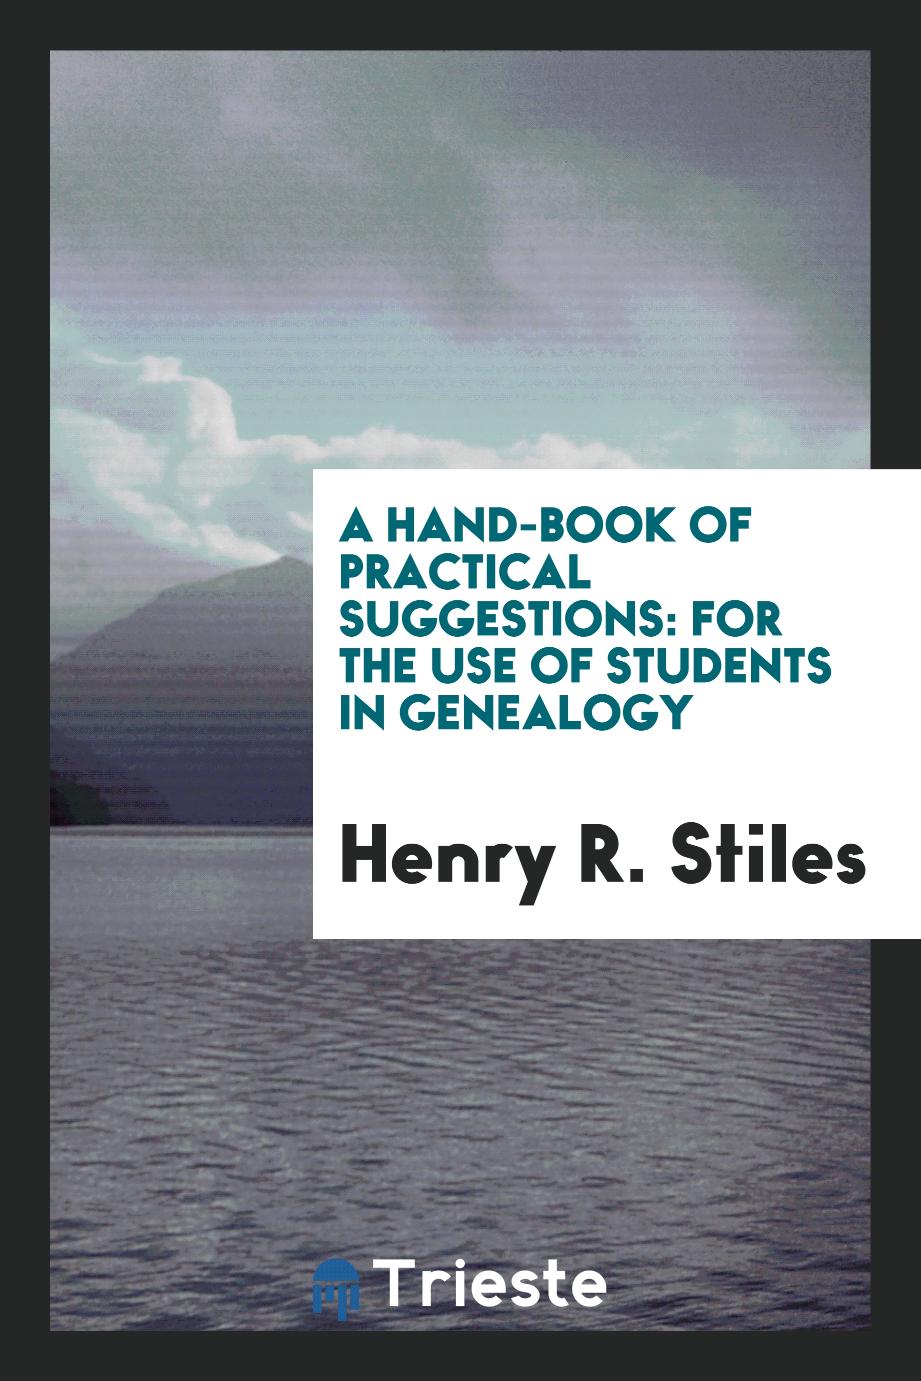 A Hand-book of Practical Suggestions: For the Use of Students in Genealogy